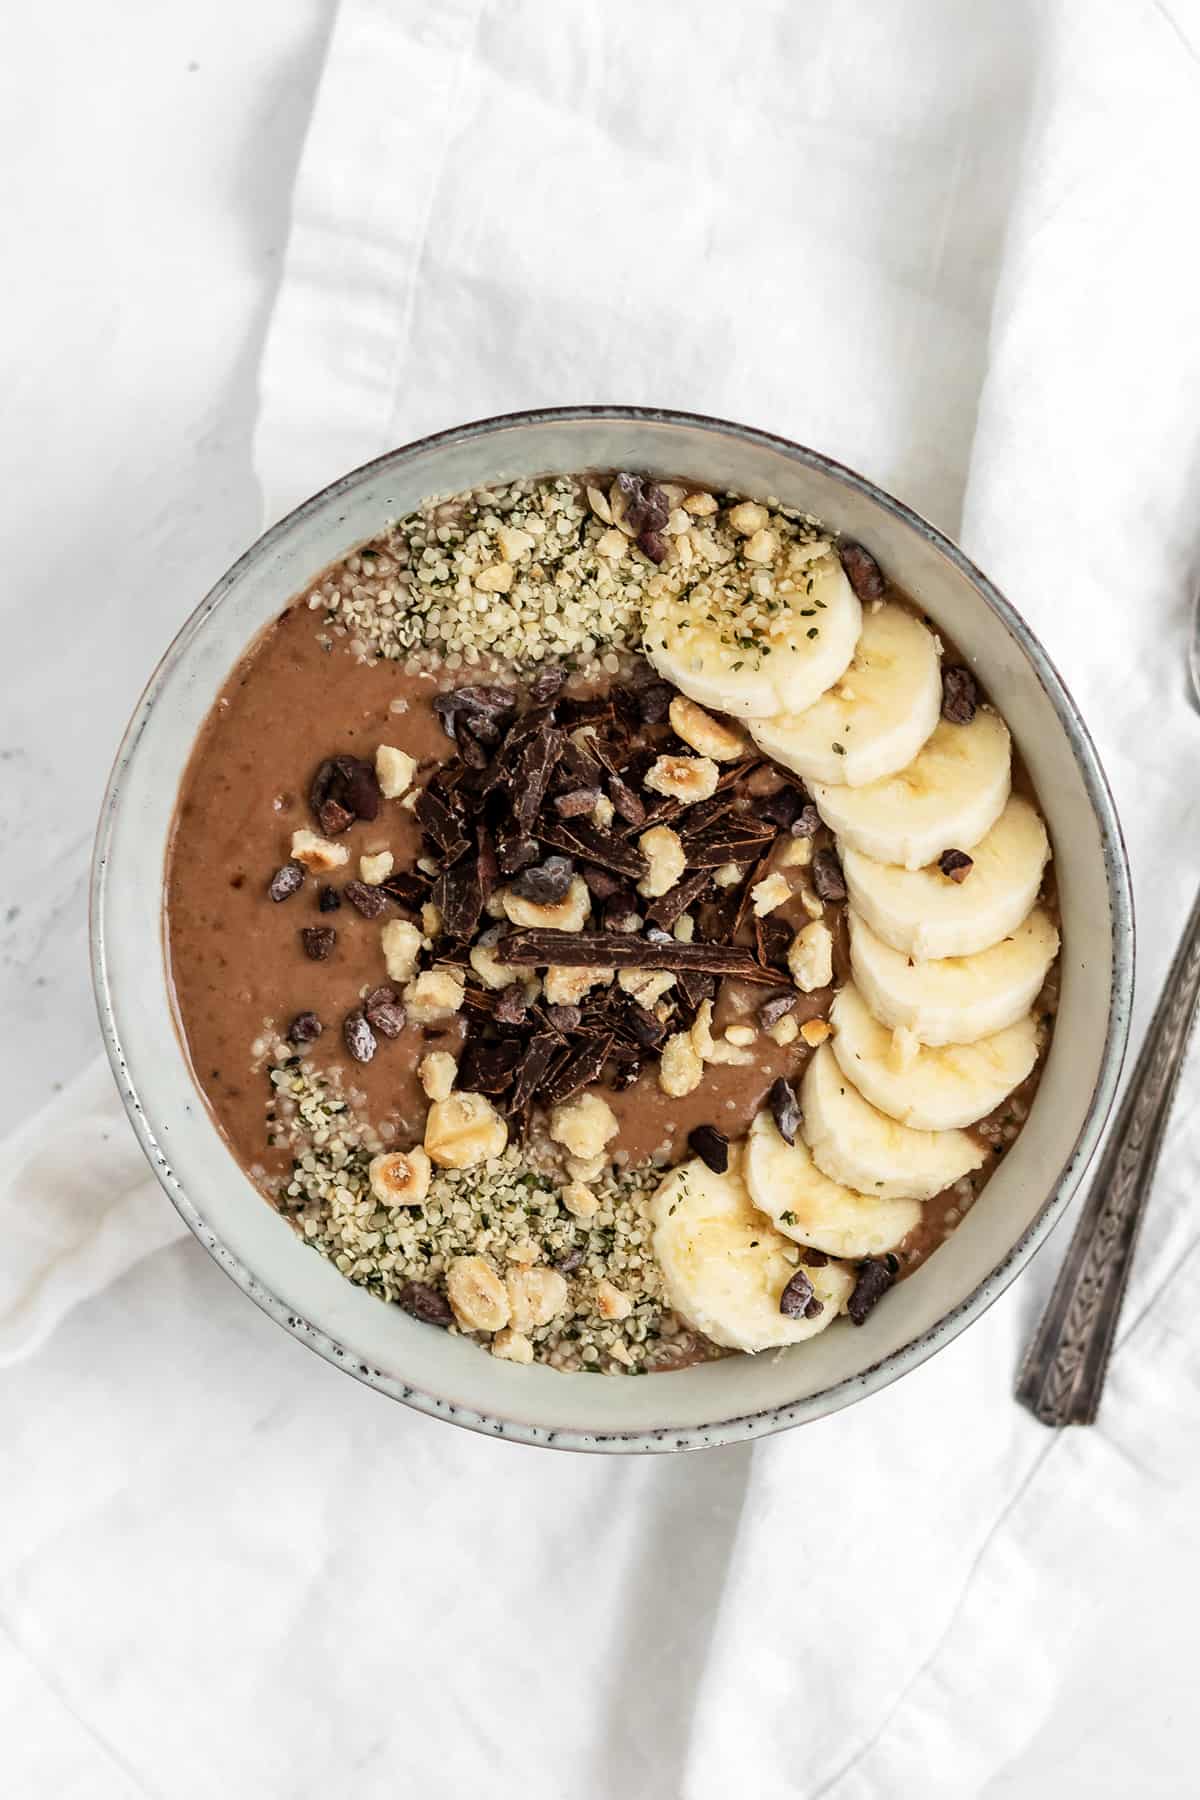 This Chocolate Hazelnut Smoothie Bowl made with cacao and roasted hazelnuts tastes just like Nutella, but healthier. Its a gluten free and vegan breakfast that comes together in just 5 minutes making it the perfect way to start the day!